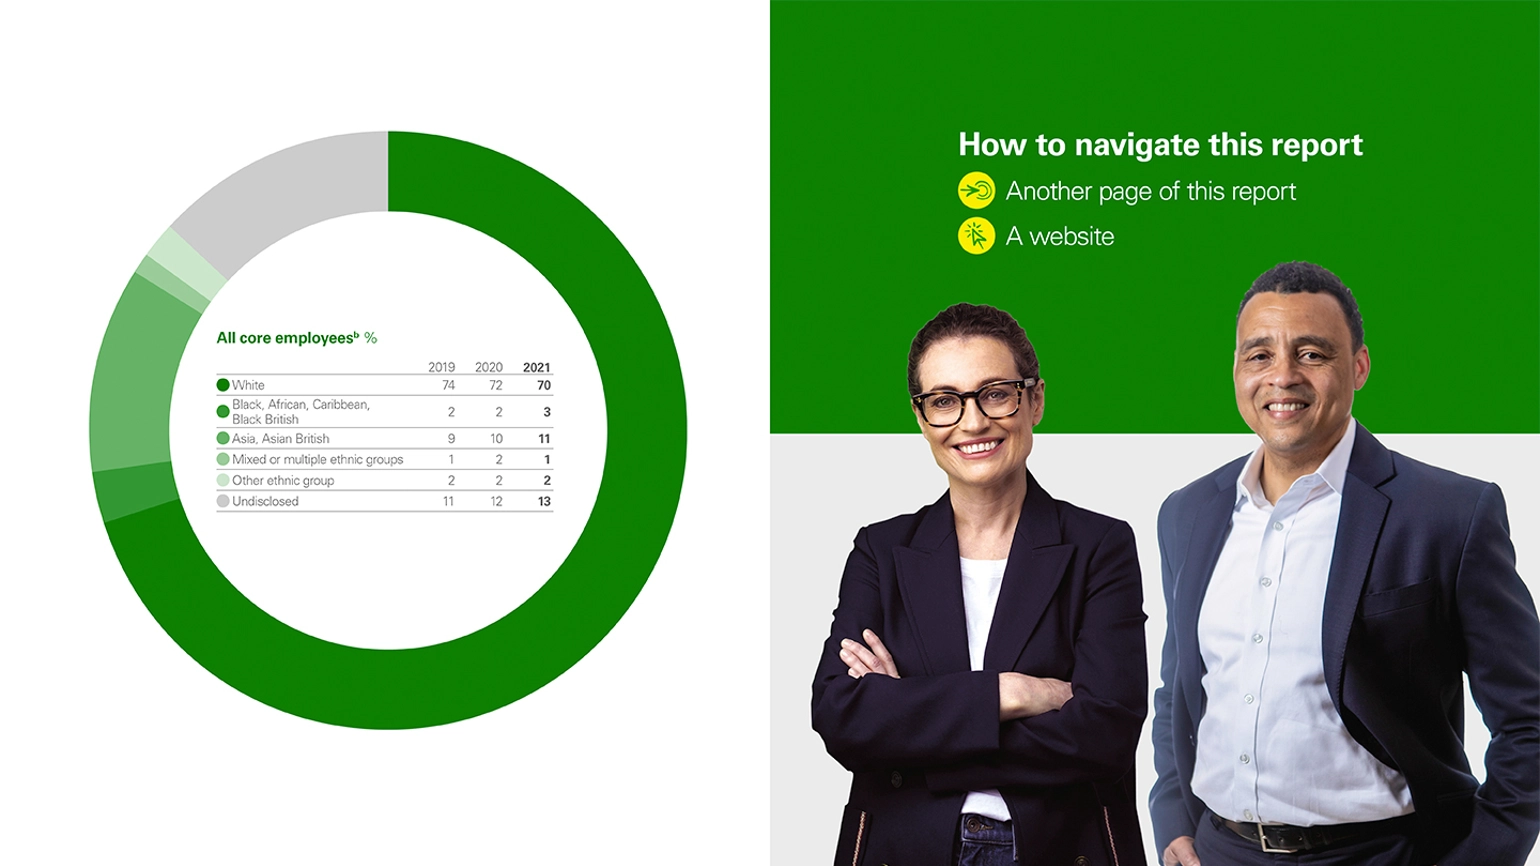 Example of the report design with a chart of numbers on the left and then a photo of a man and a woman smiling at the camera with a title above on how to navigate the report